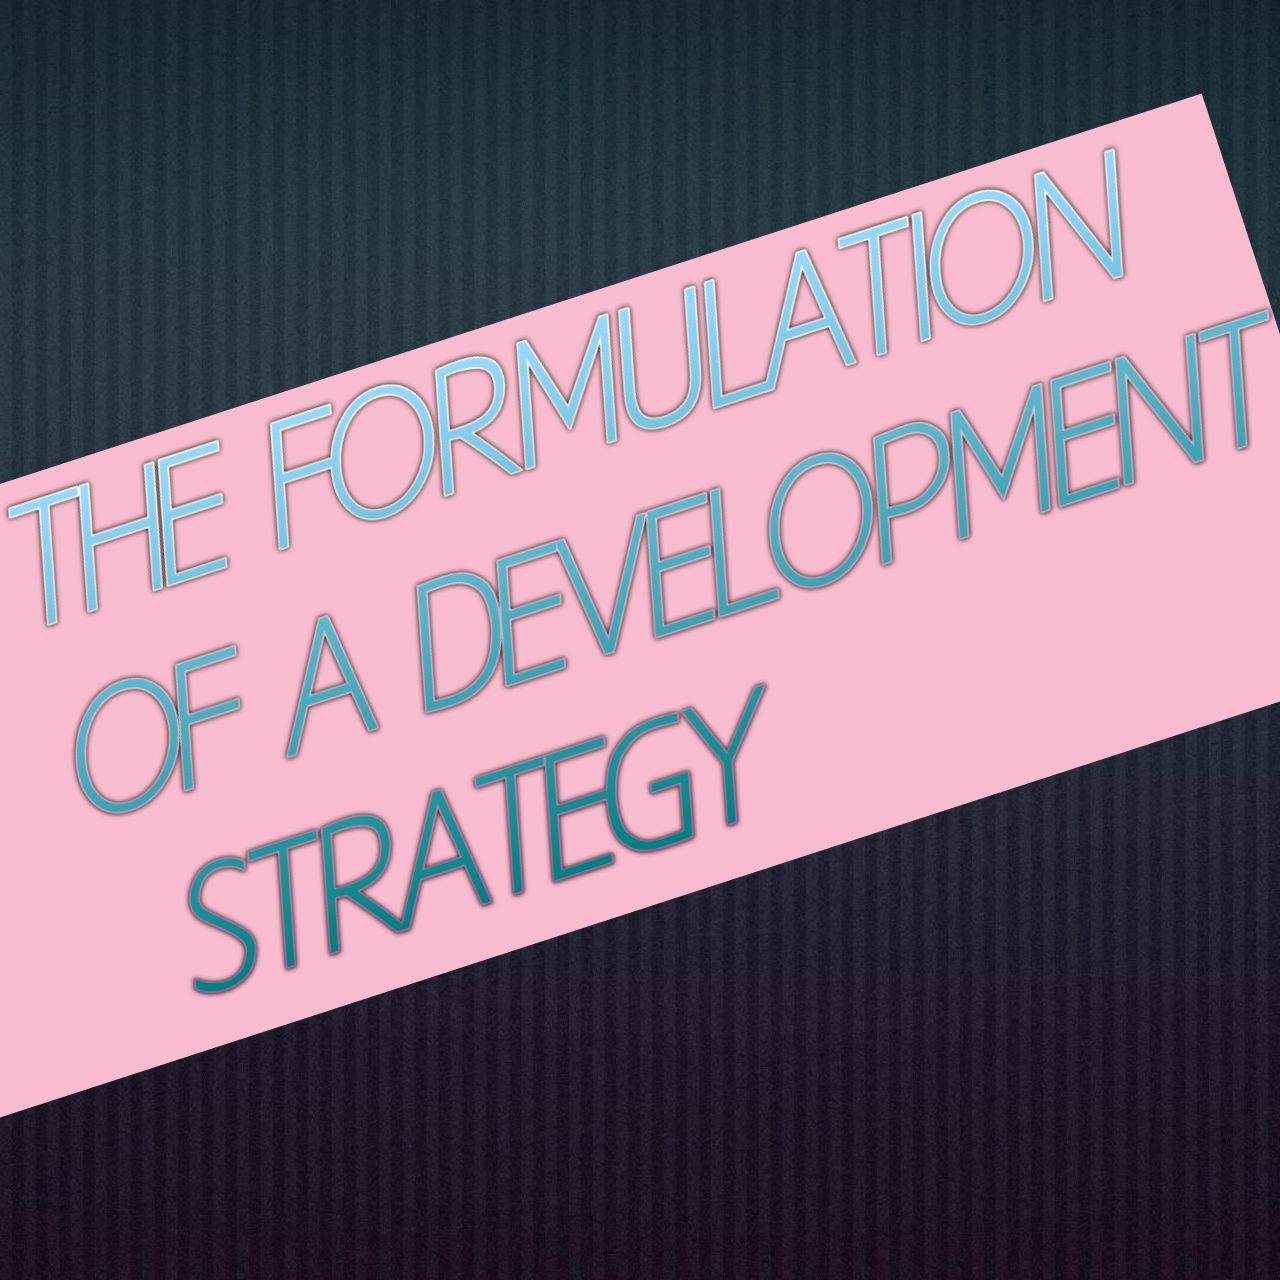 The Formulation Of A Development Strategy